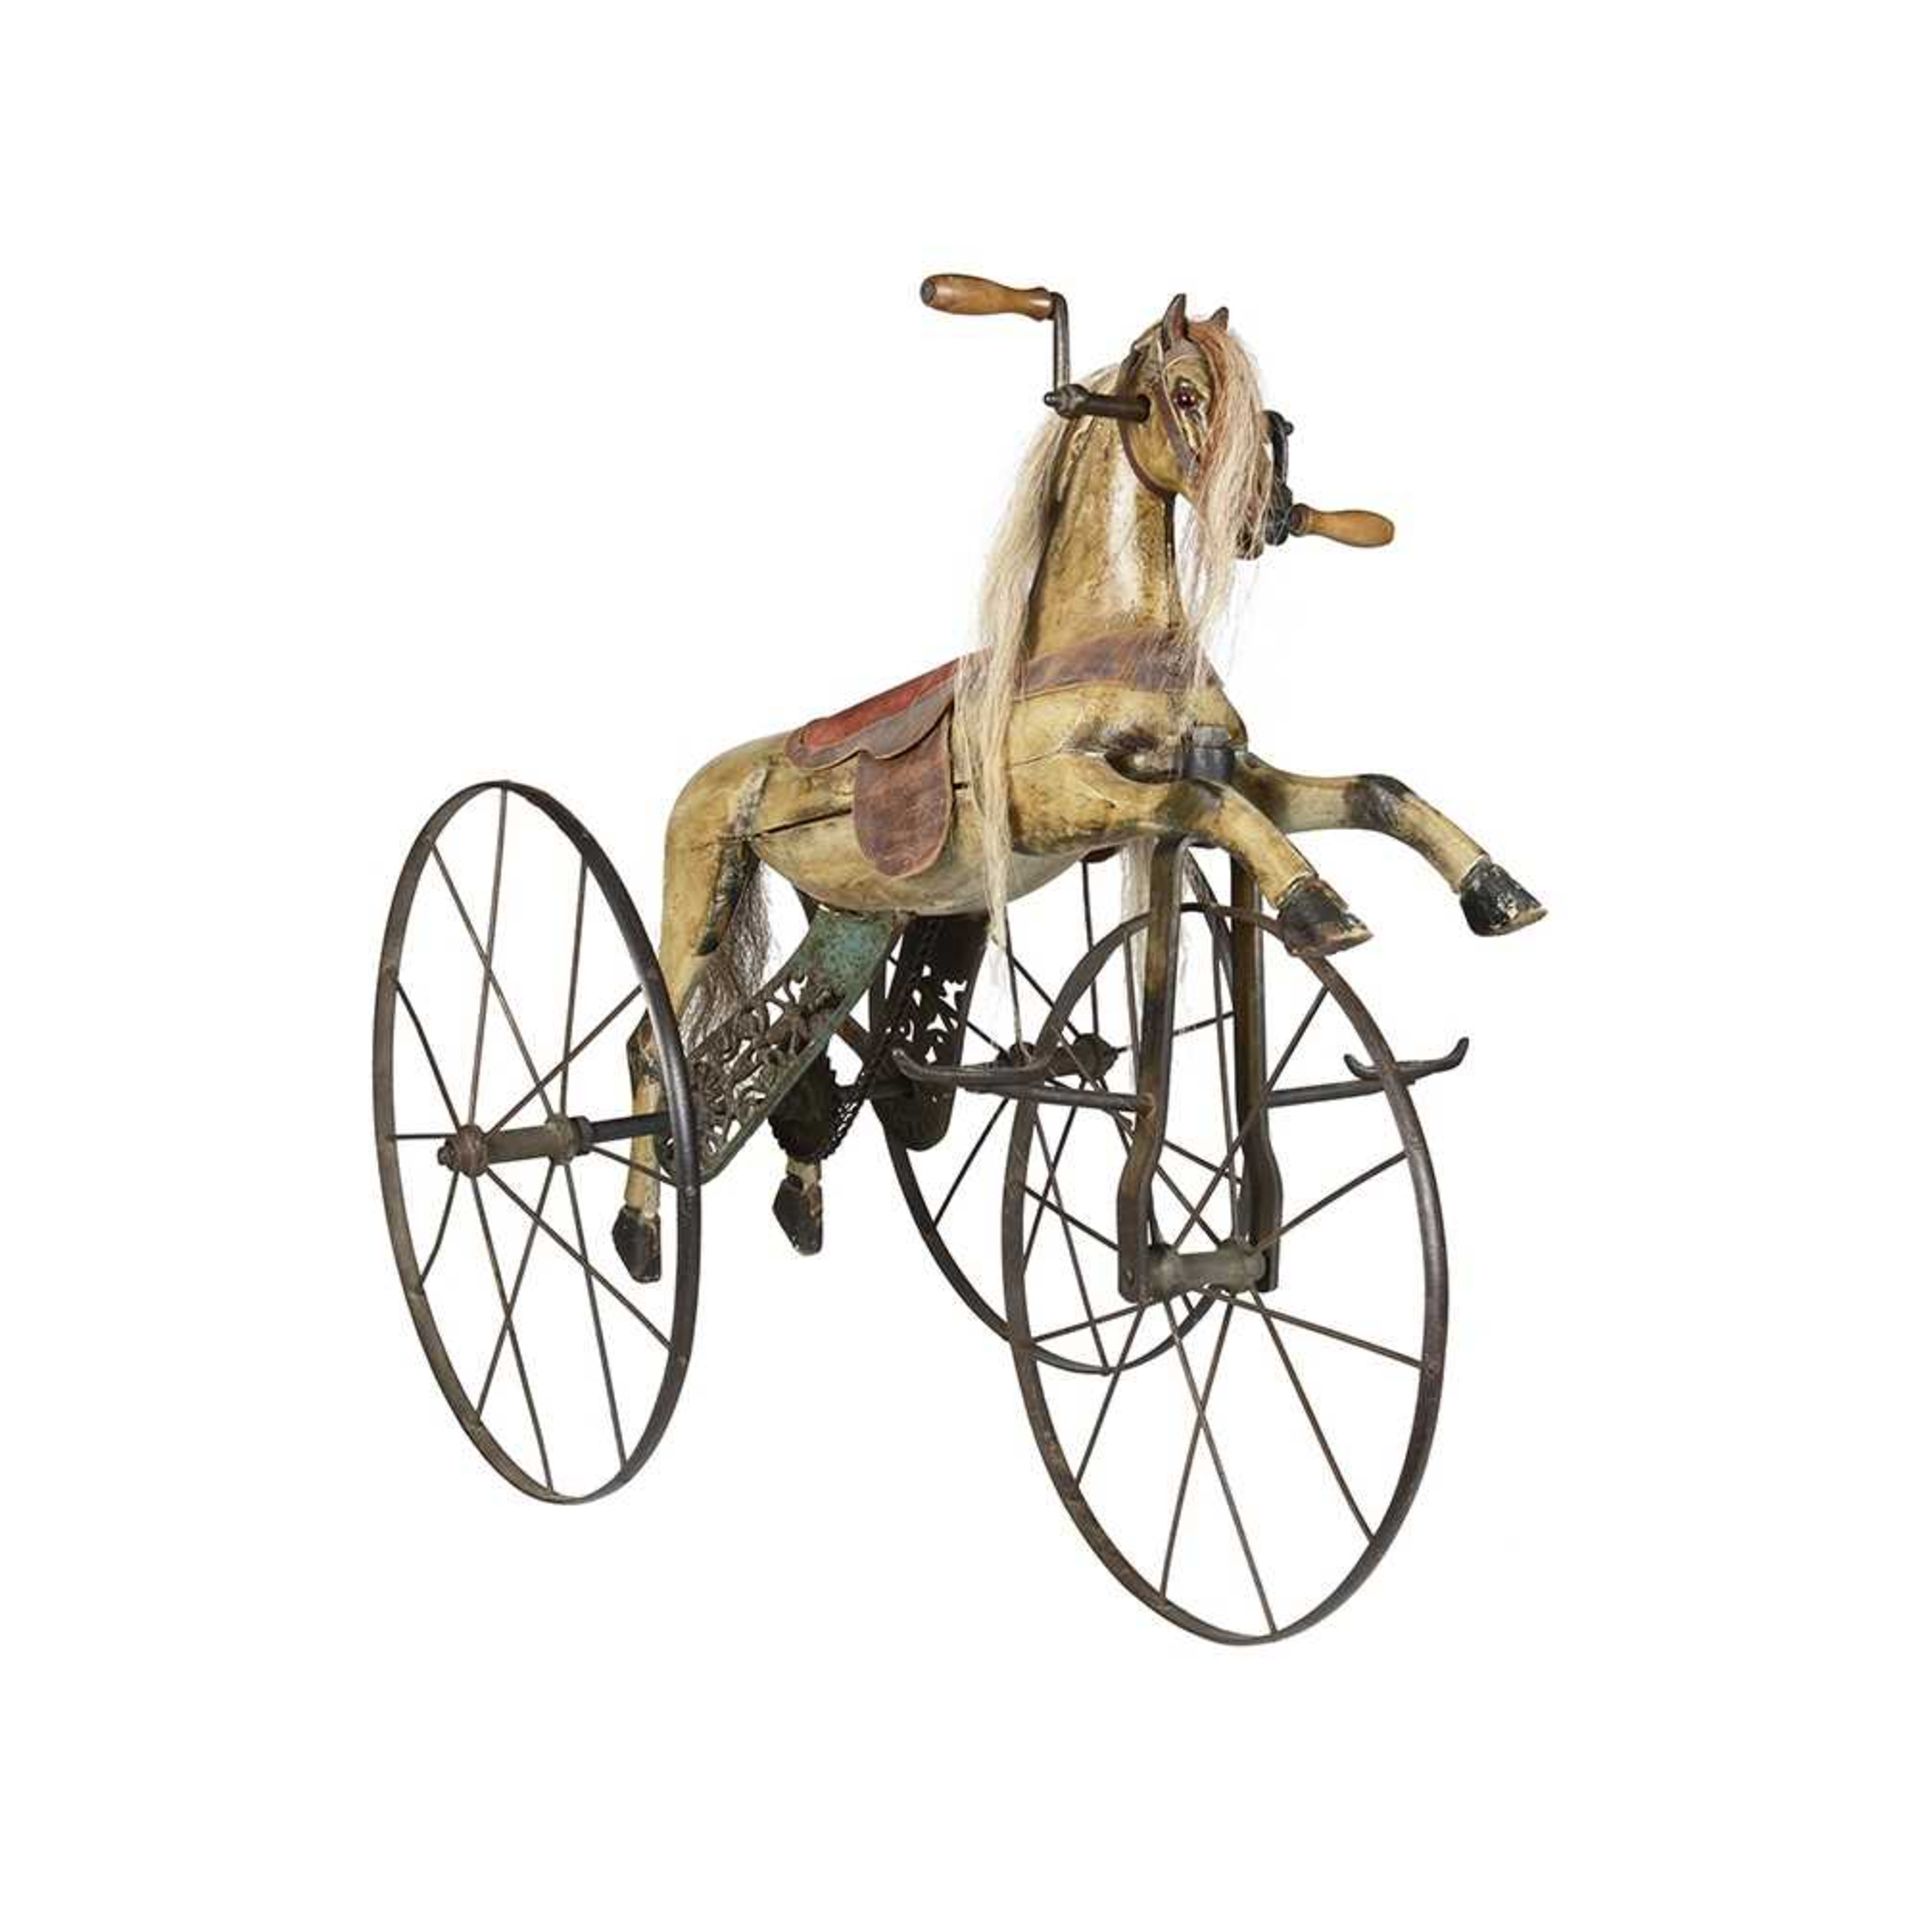 A LATE 19TH CENTURY FRENCH PAINTED WOOD HORSE CHAIN DRIVEN TRICYCLE OR VELOCIPEDE - Image 5 of 12